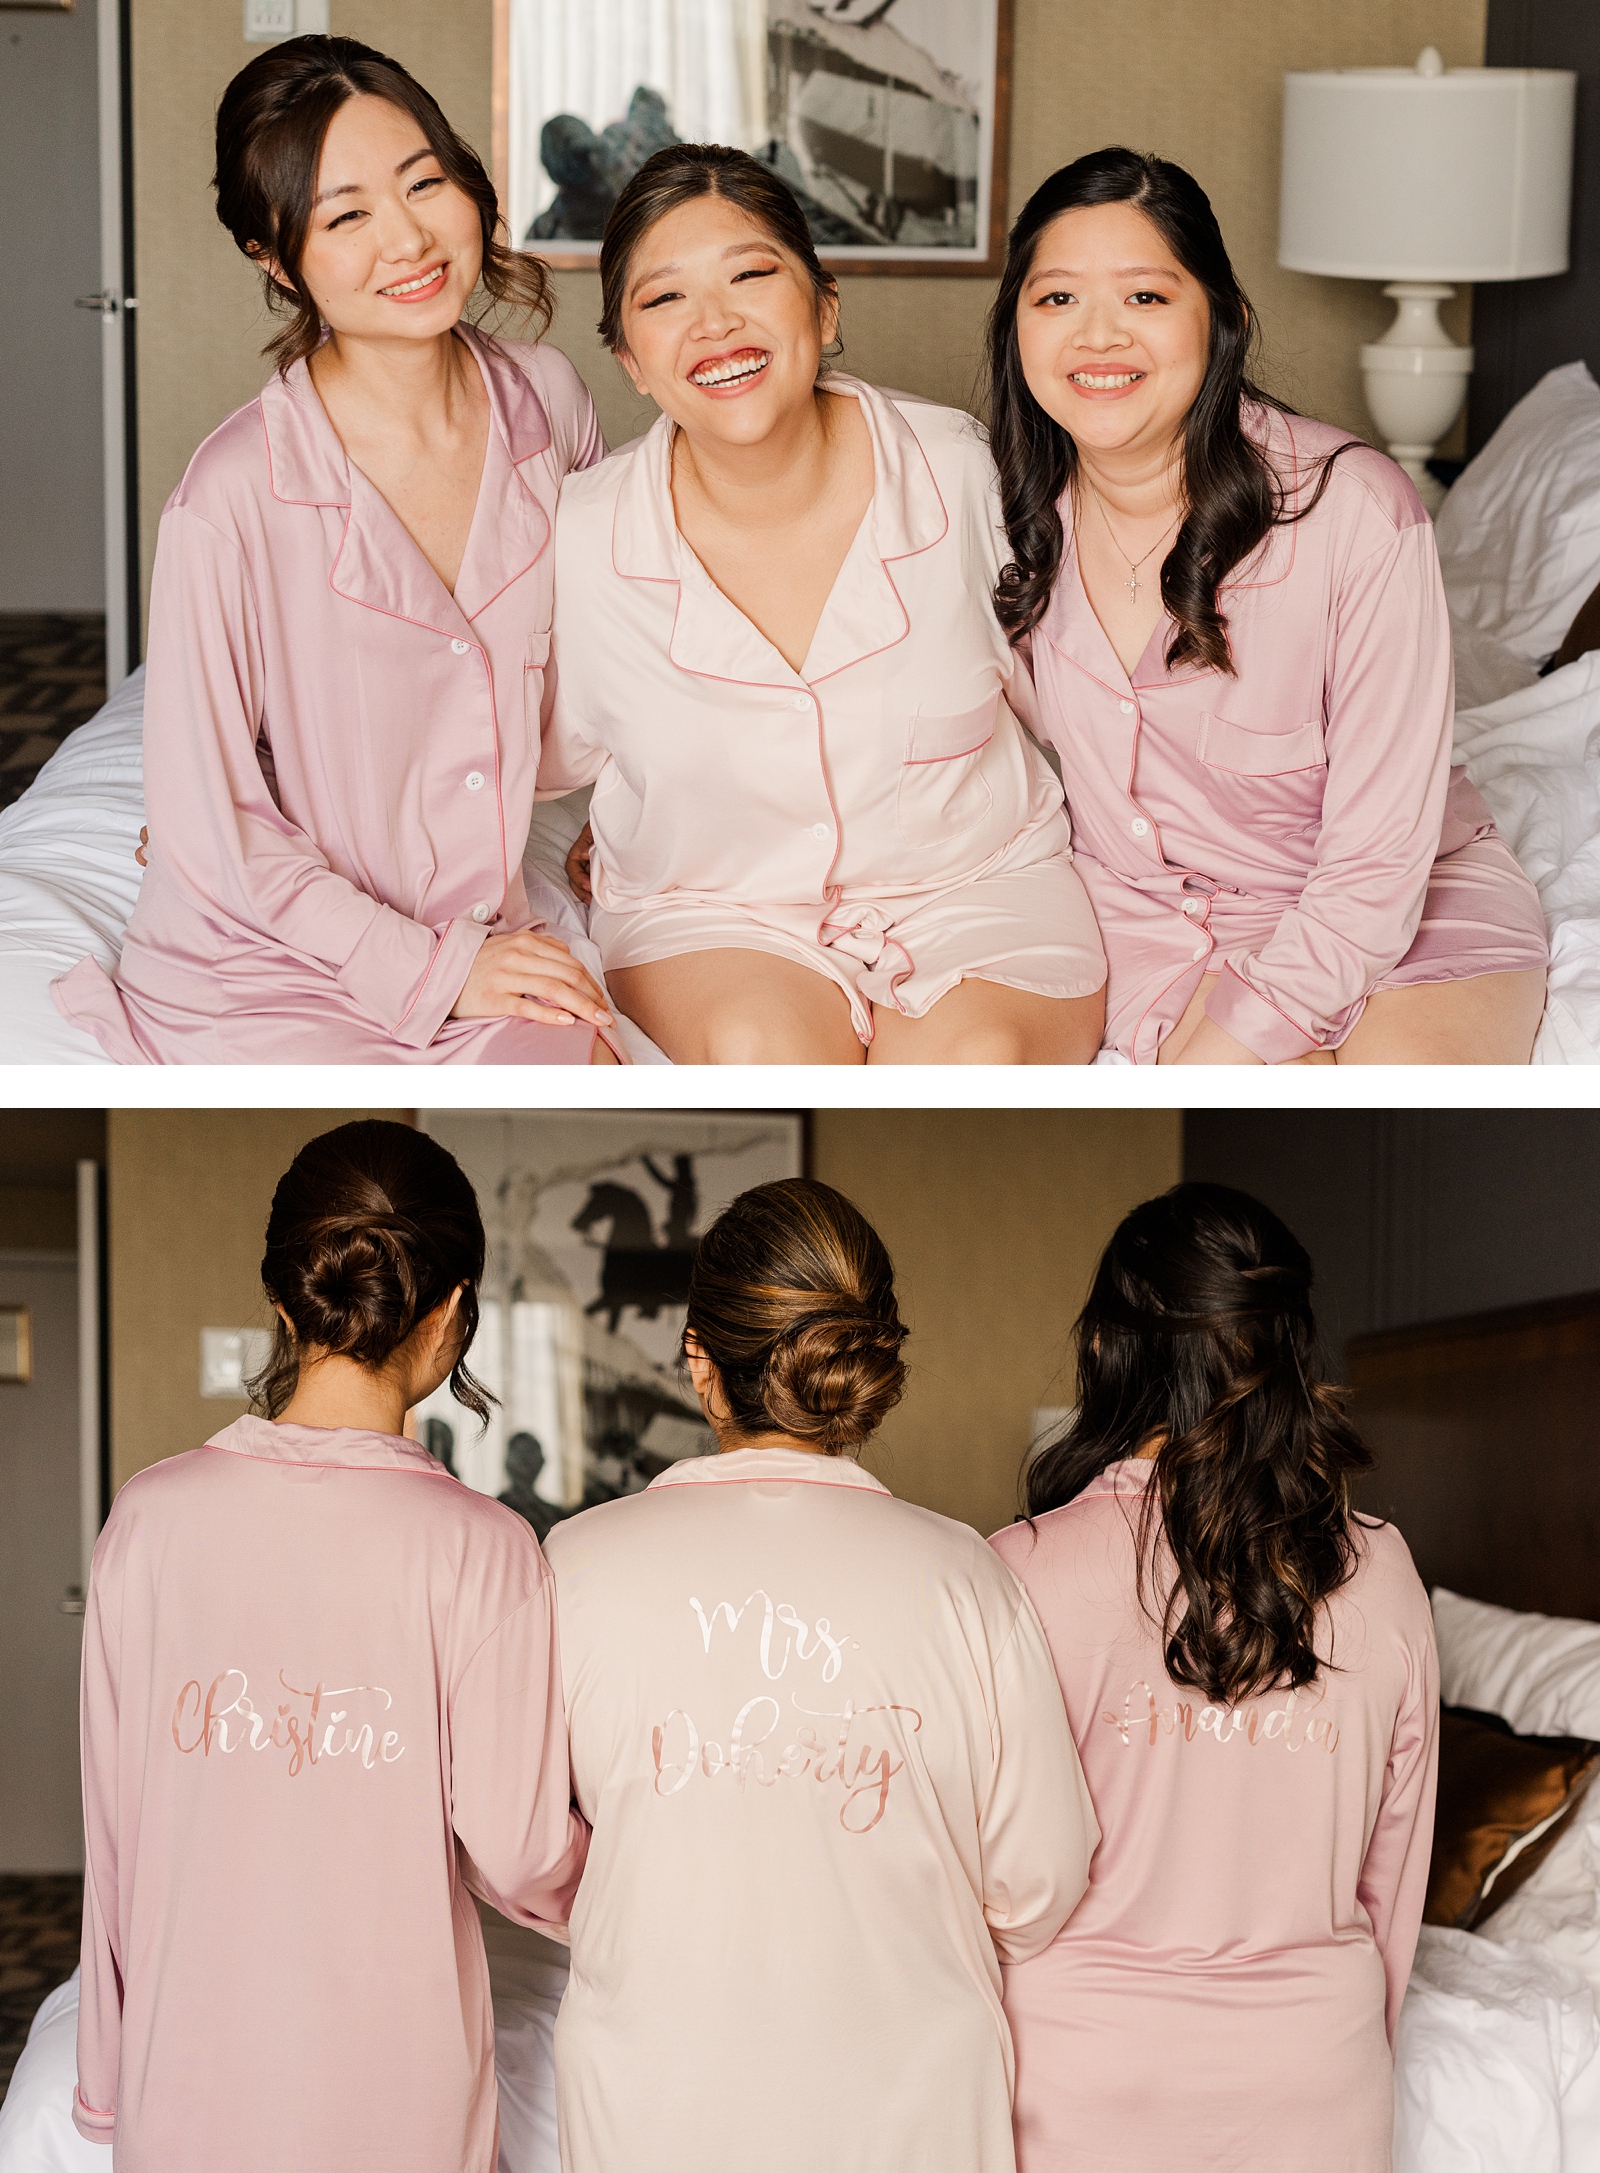 Getting Ready Gowns for Bride and Bridesmaids Omni Hotel Wedding. Virginia Intimate Wedding Photographer Kailey Brianne Photography.